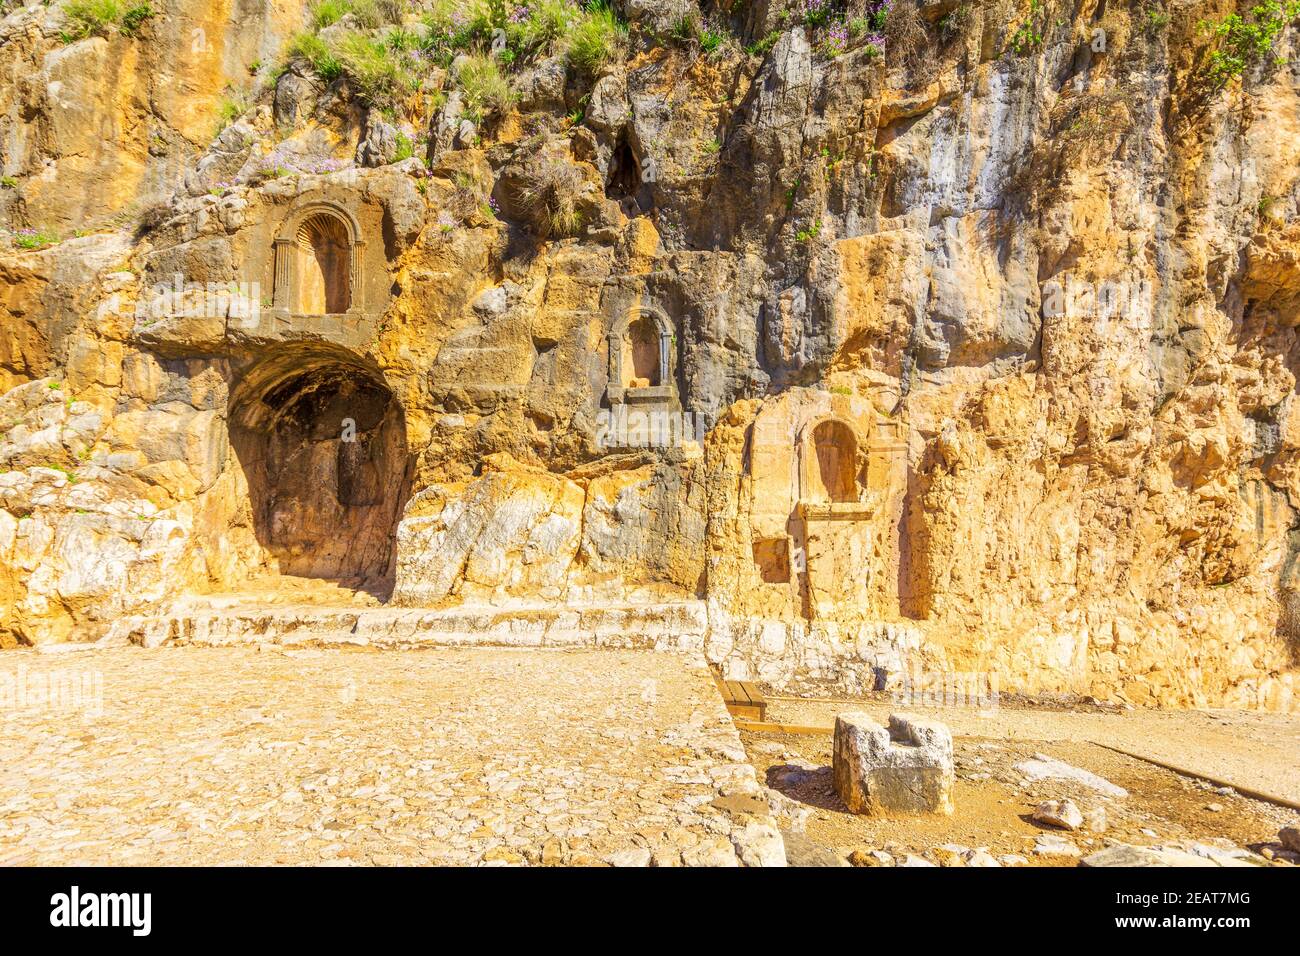 View of the remains of the Shrine and Cave of Pan, in the Hermon Stream (Banias) Nature Reserve, Upper Galilee, Northern Israel Stock Photo